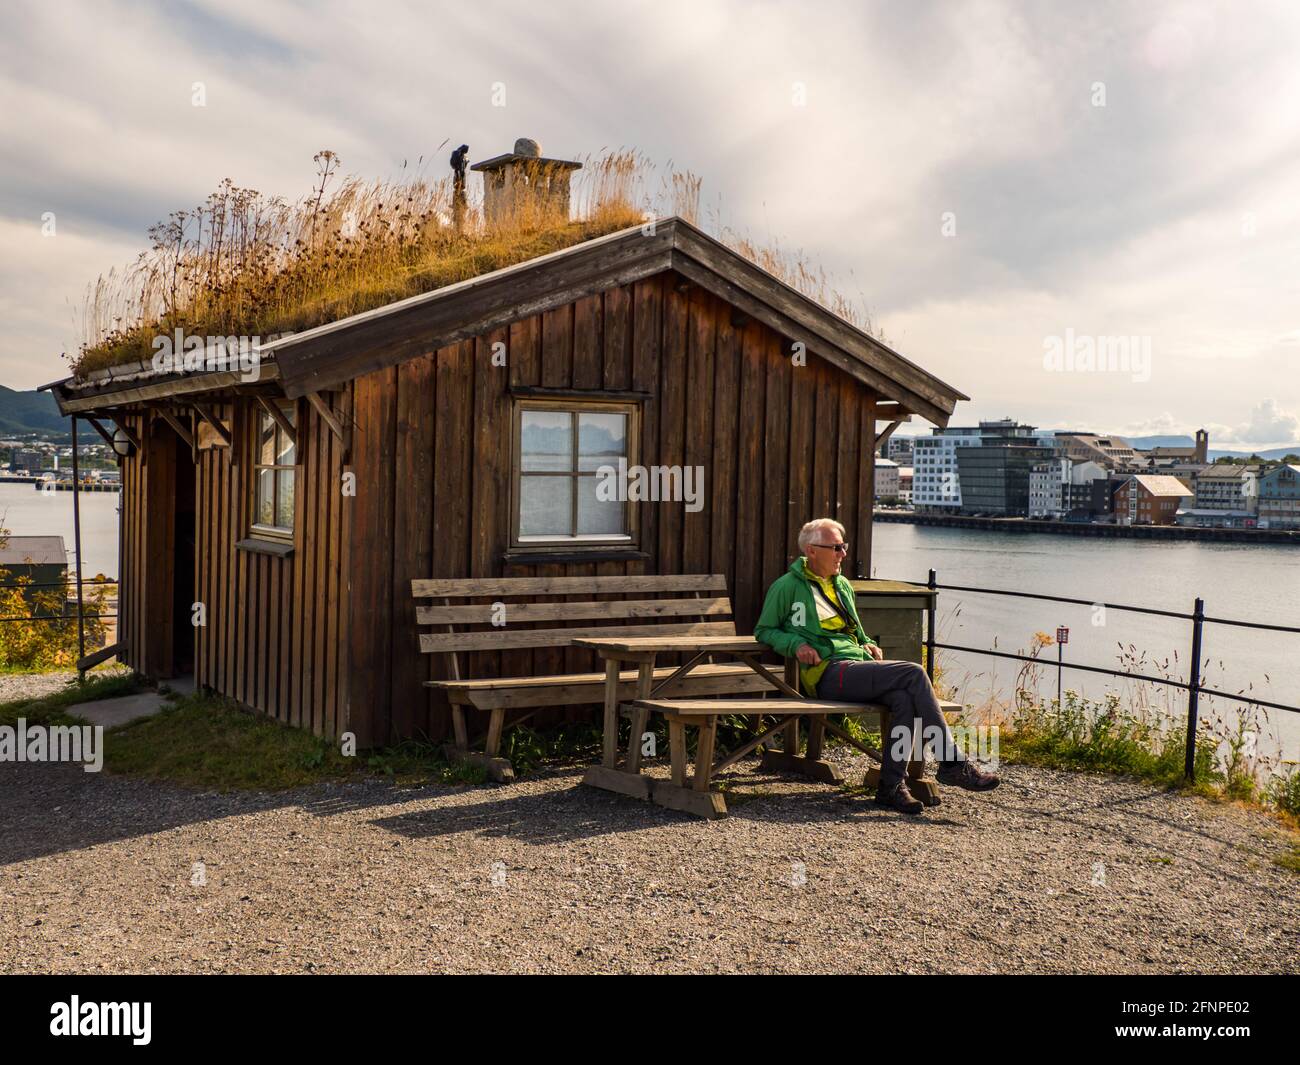 Bodo, Norway - Aug, 2019: A tourist sits on a bench in front of a typical Norwegian wooden house on Nyholmen - an area on the Burøya peninsula. Nyholm Stock Photo